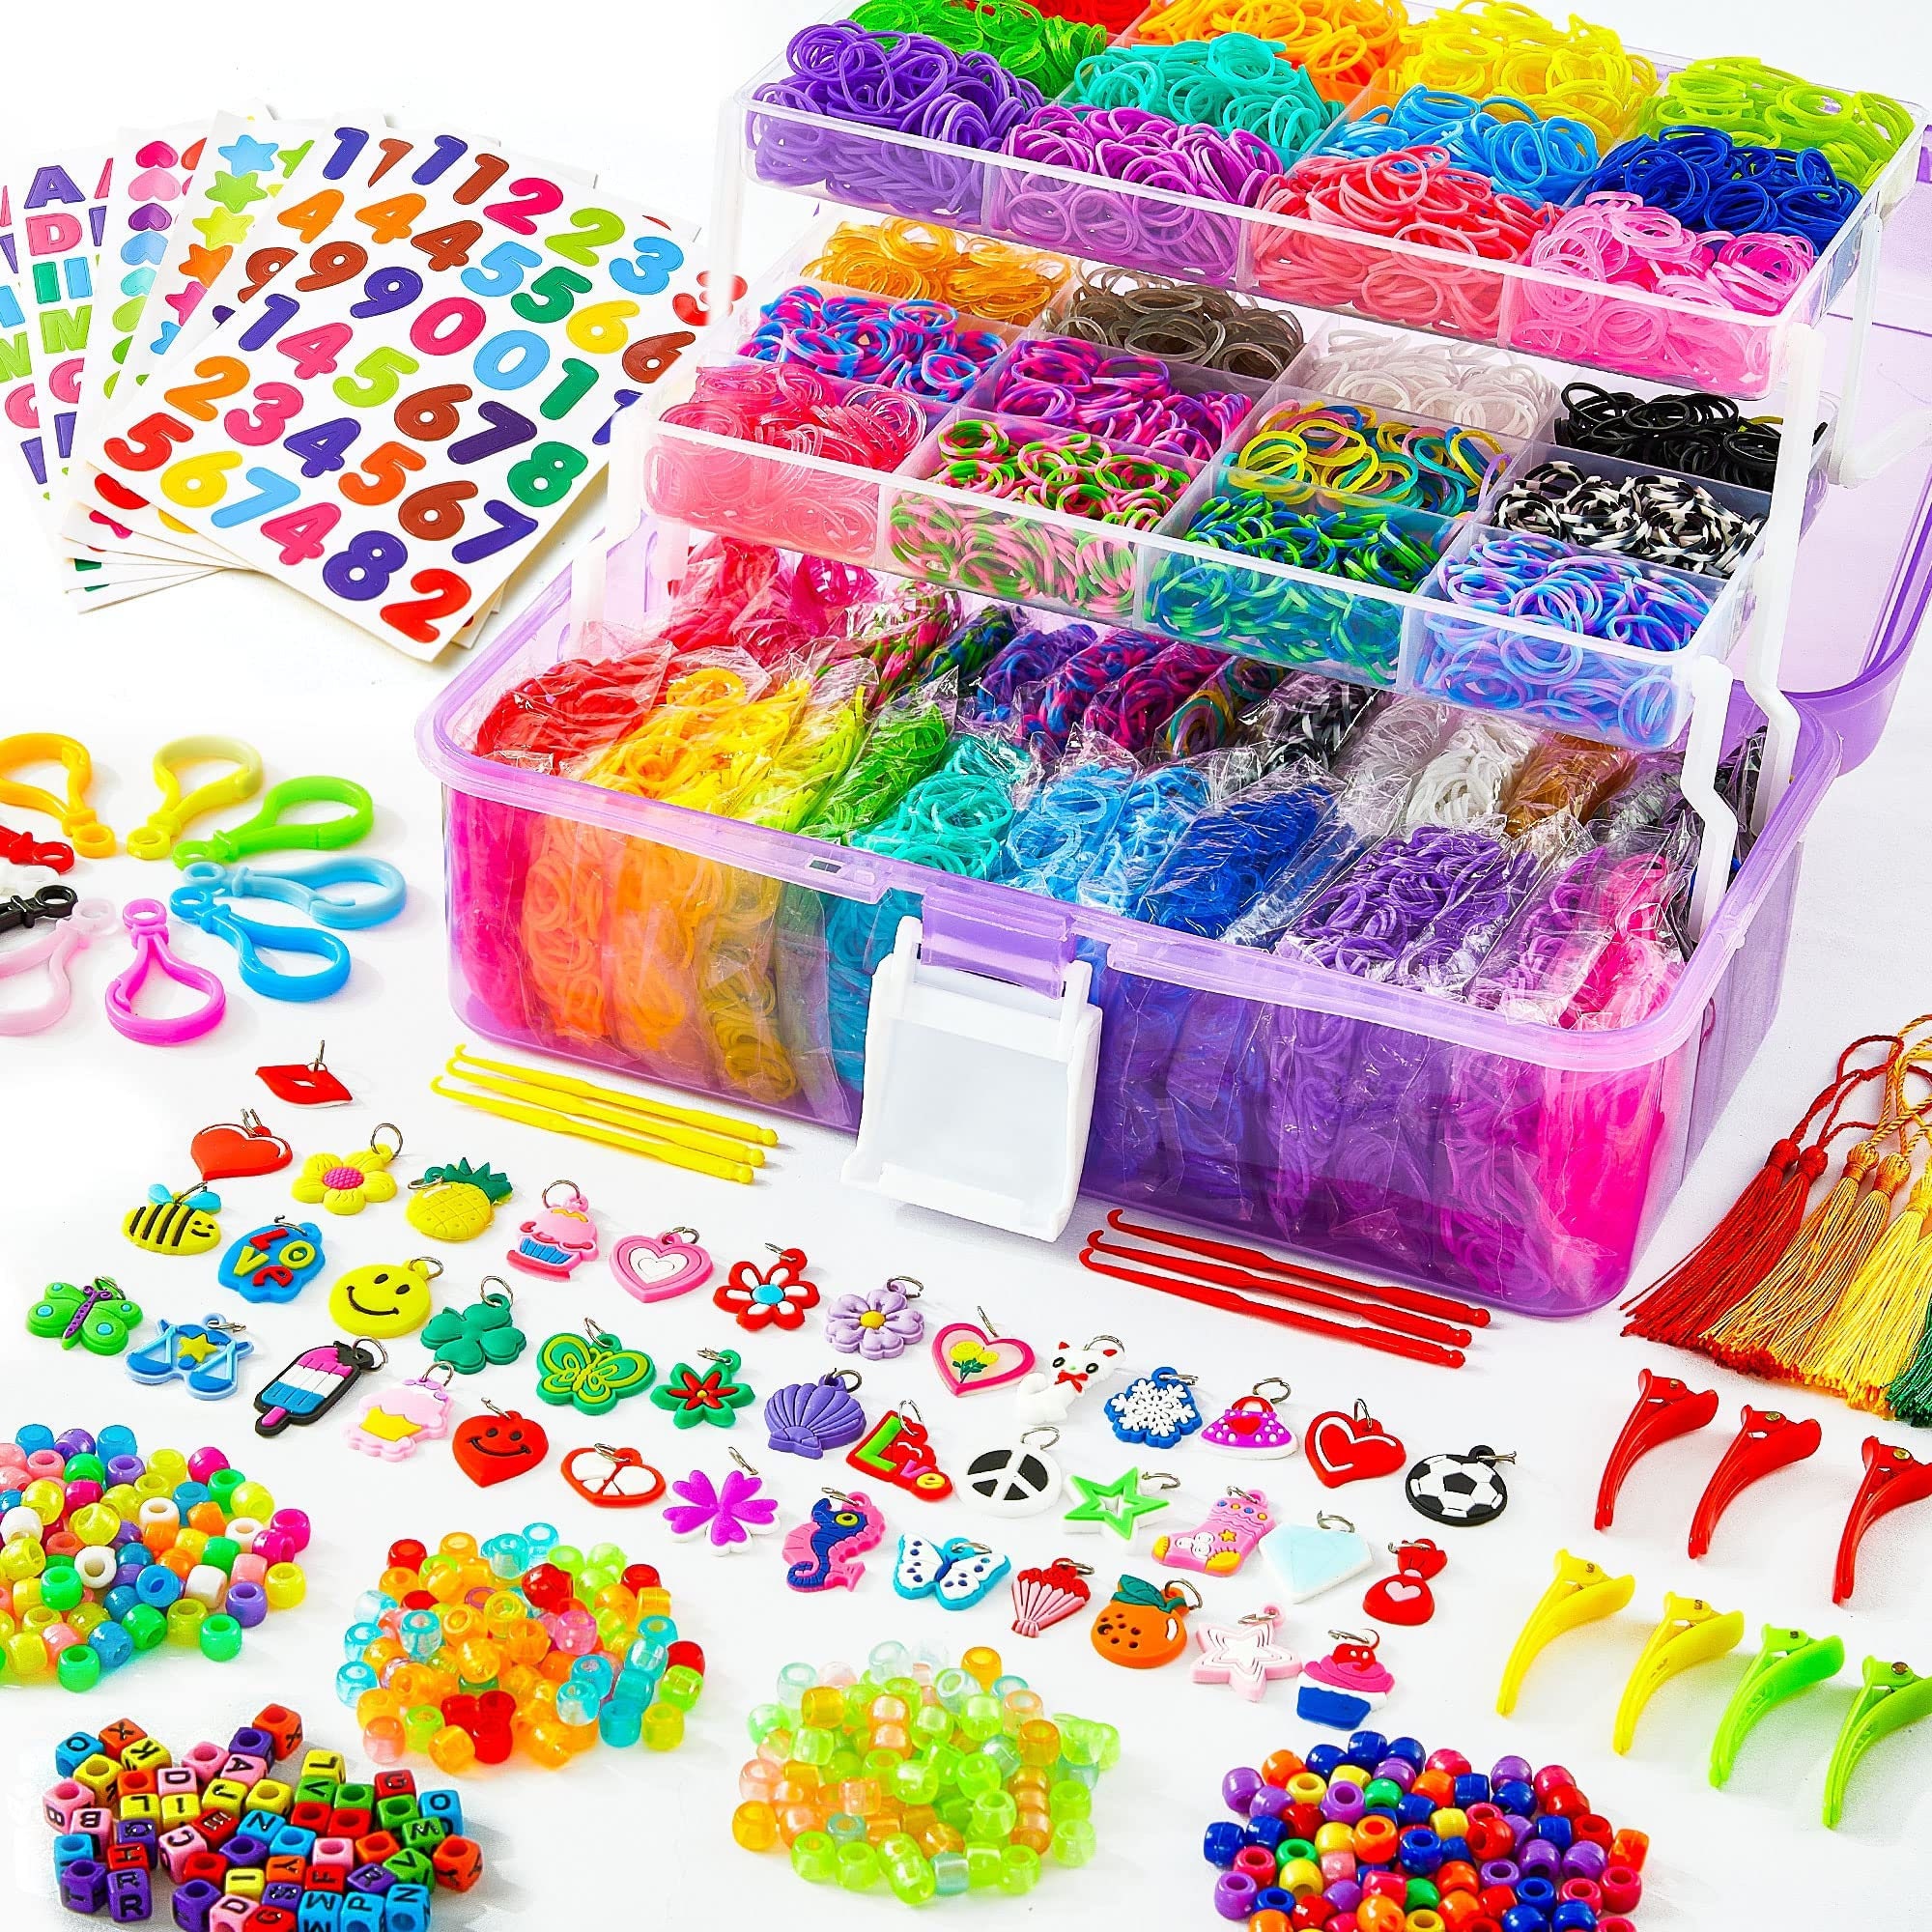 Umatrain 1500+ Rubber Band Bracelet Kit, Loom Bands, Rubber Band Bracelet  Making Kit with Storage Container, Beads, Charms, Crochet Hooks and S-Clips  : Amazon.in: Home & Kitchen